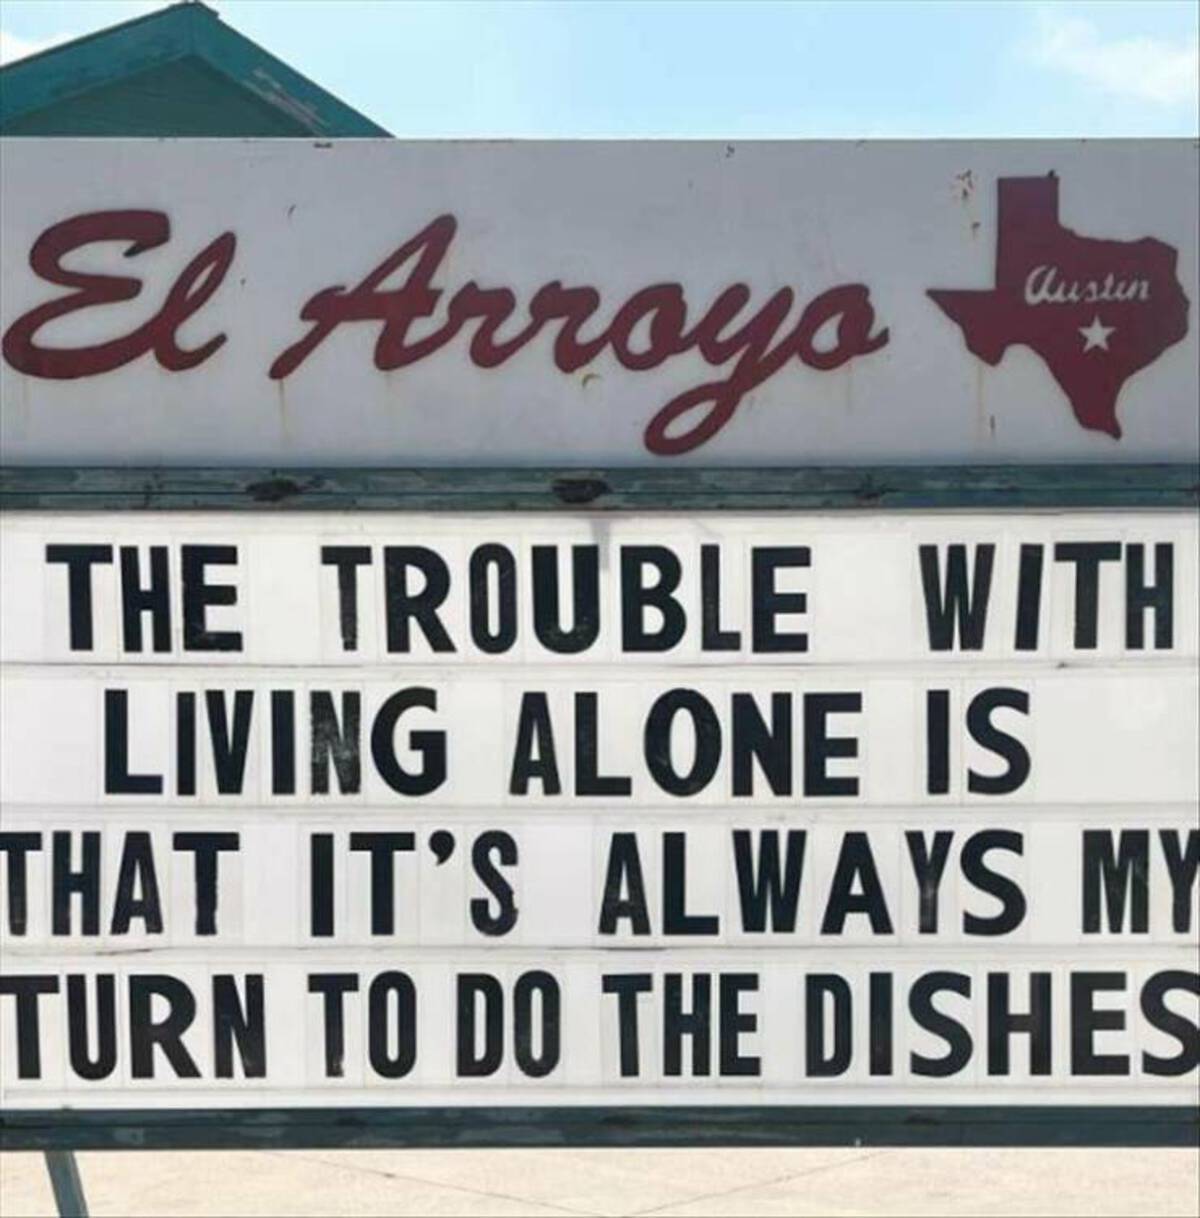 signage - El Arroyo austin The Trouble With Living Alone Is That It'S Always My Turn To Do The Dishes